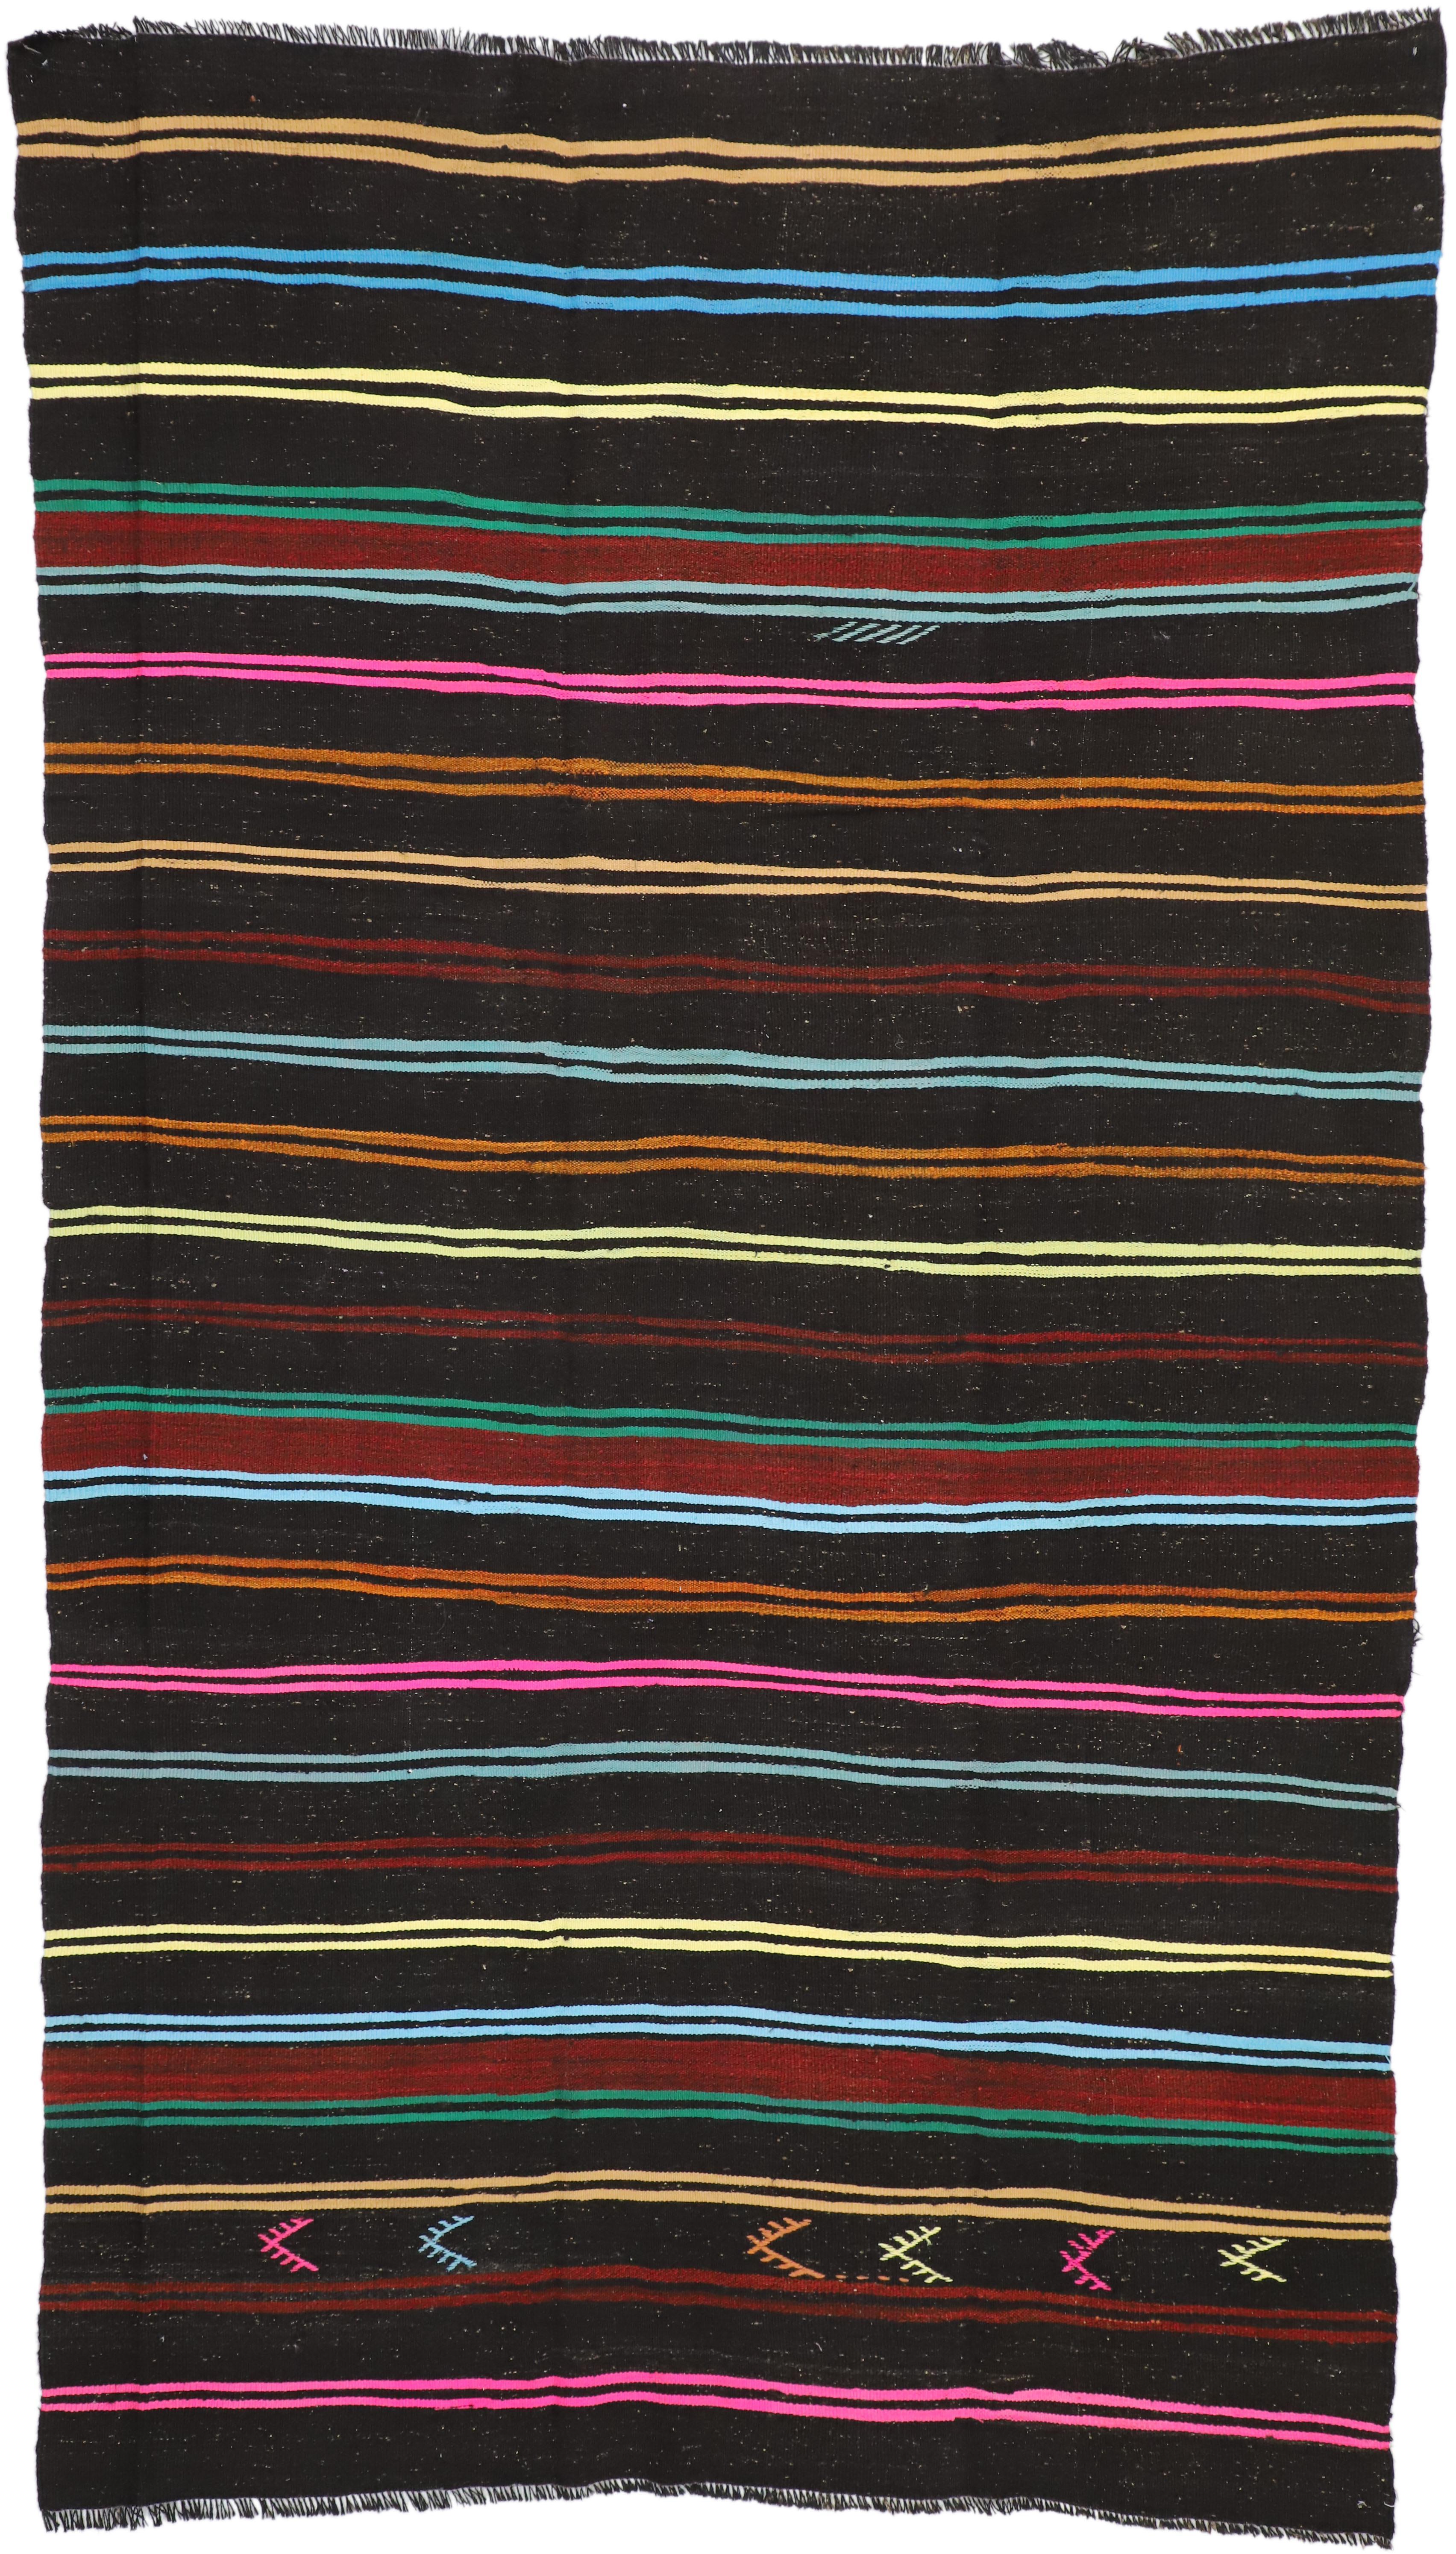 51322 Vintage Turkish Kilim with Tribal Style, Flat-weave Striped Kilim Area Rug 07'02 x 12'05. Highlighting the finest trends in design, this Boho Chic vintage Turkish Kilim with stripes and Modern Tribal style features a series of bands in vibrant